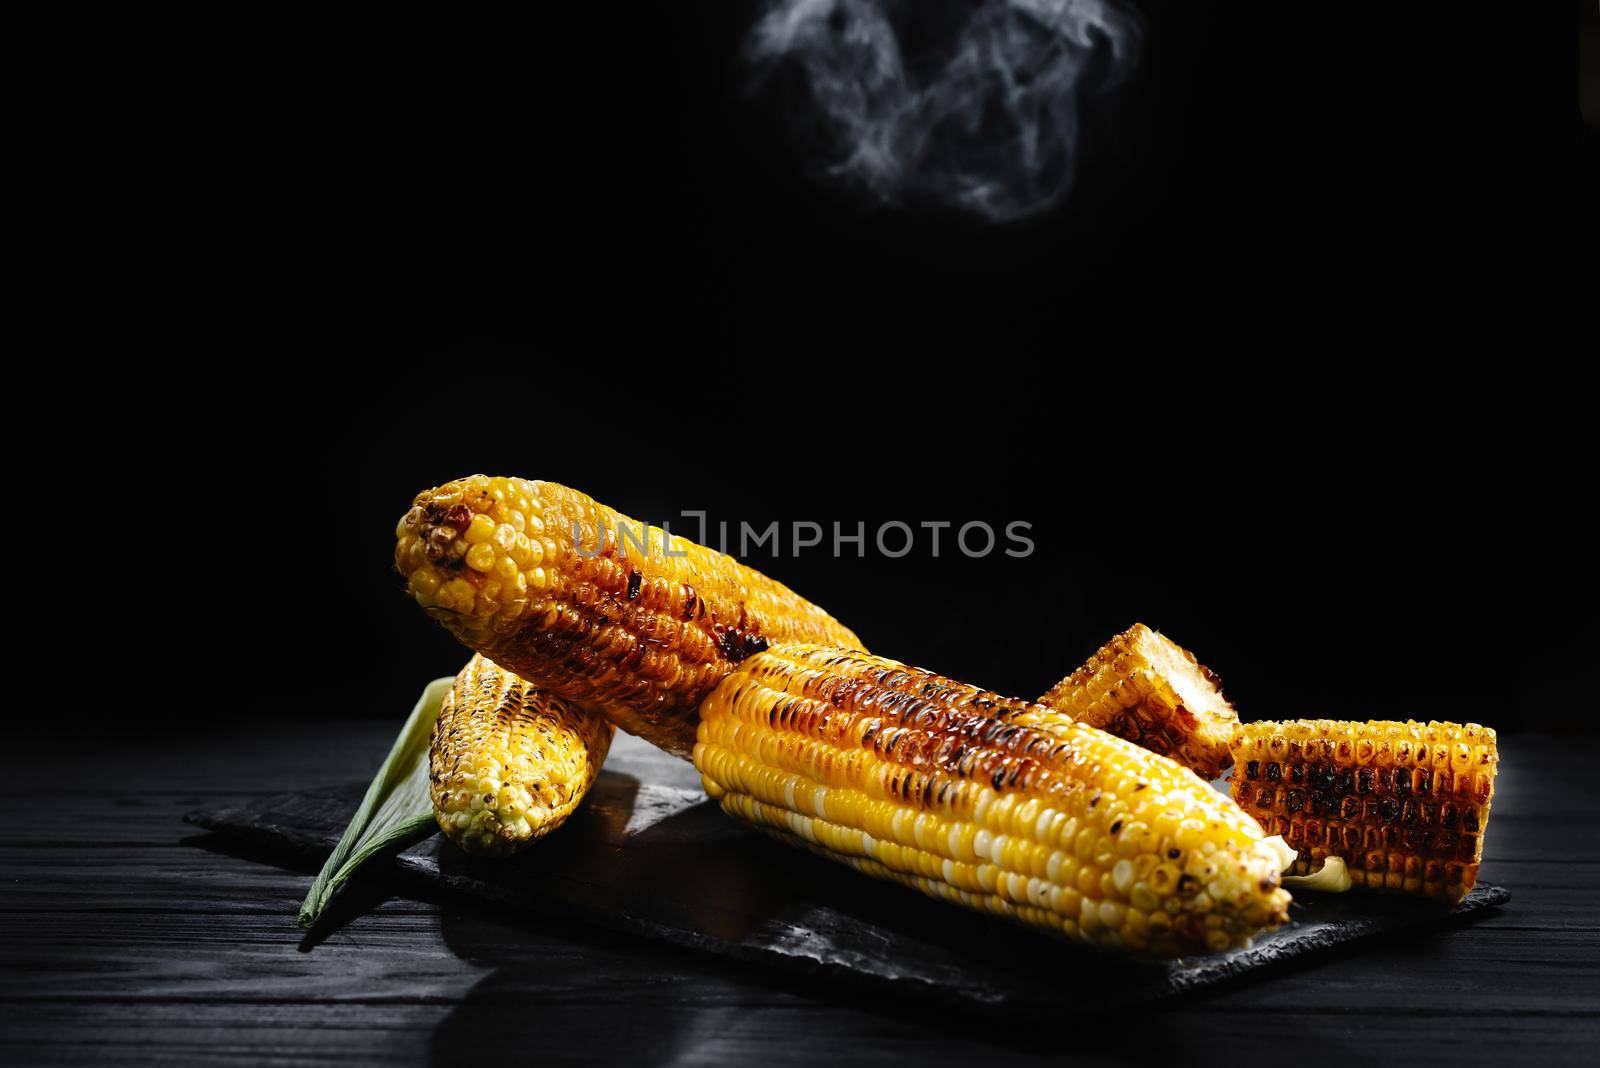 Grilled corn with smoke. A cob of corn roasted over charcoal on a wooden board. Whole corn cobs. by gulyaevstudio